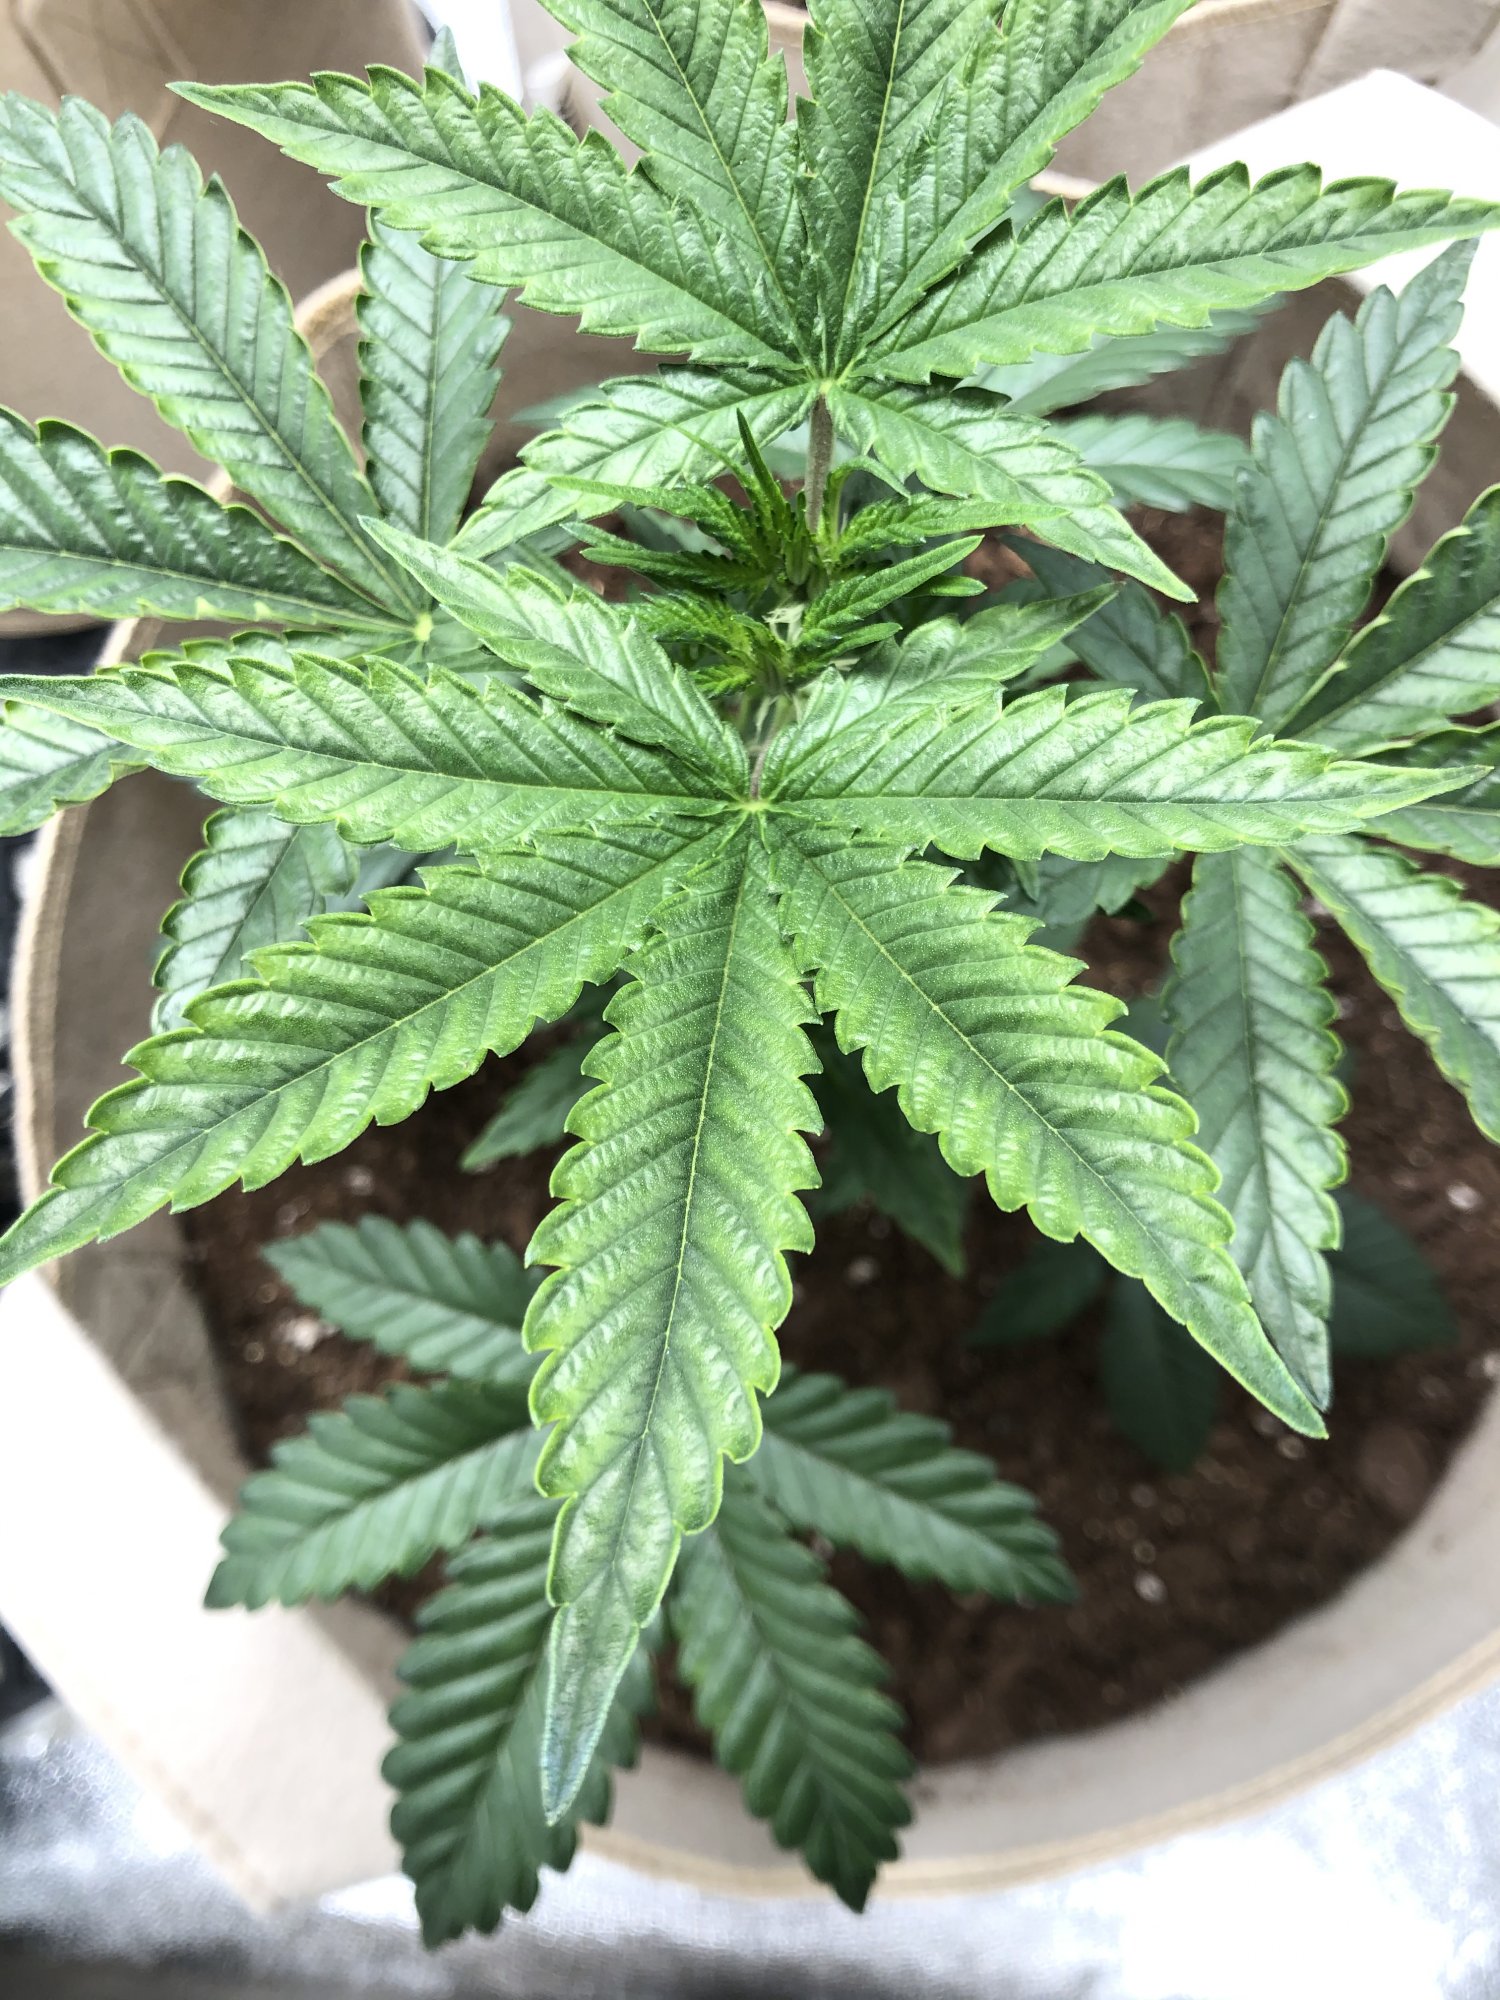 Is this plant showing the deficiencies 2